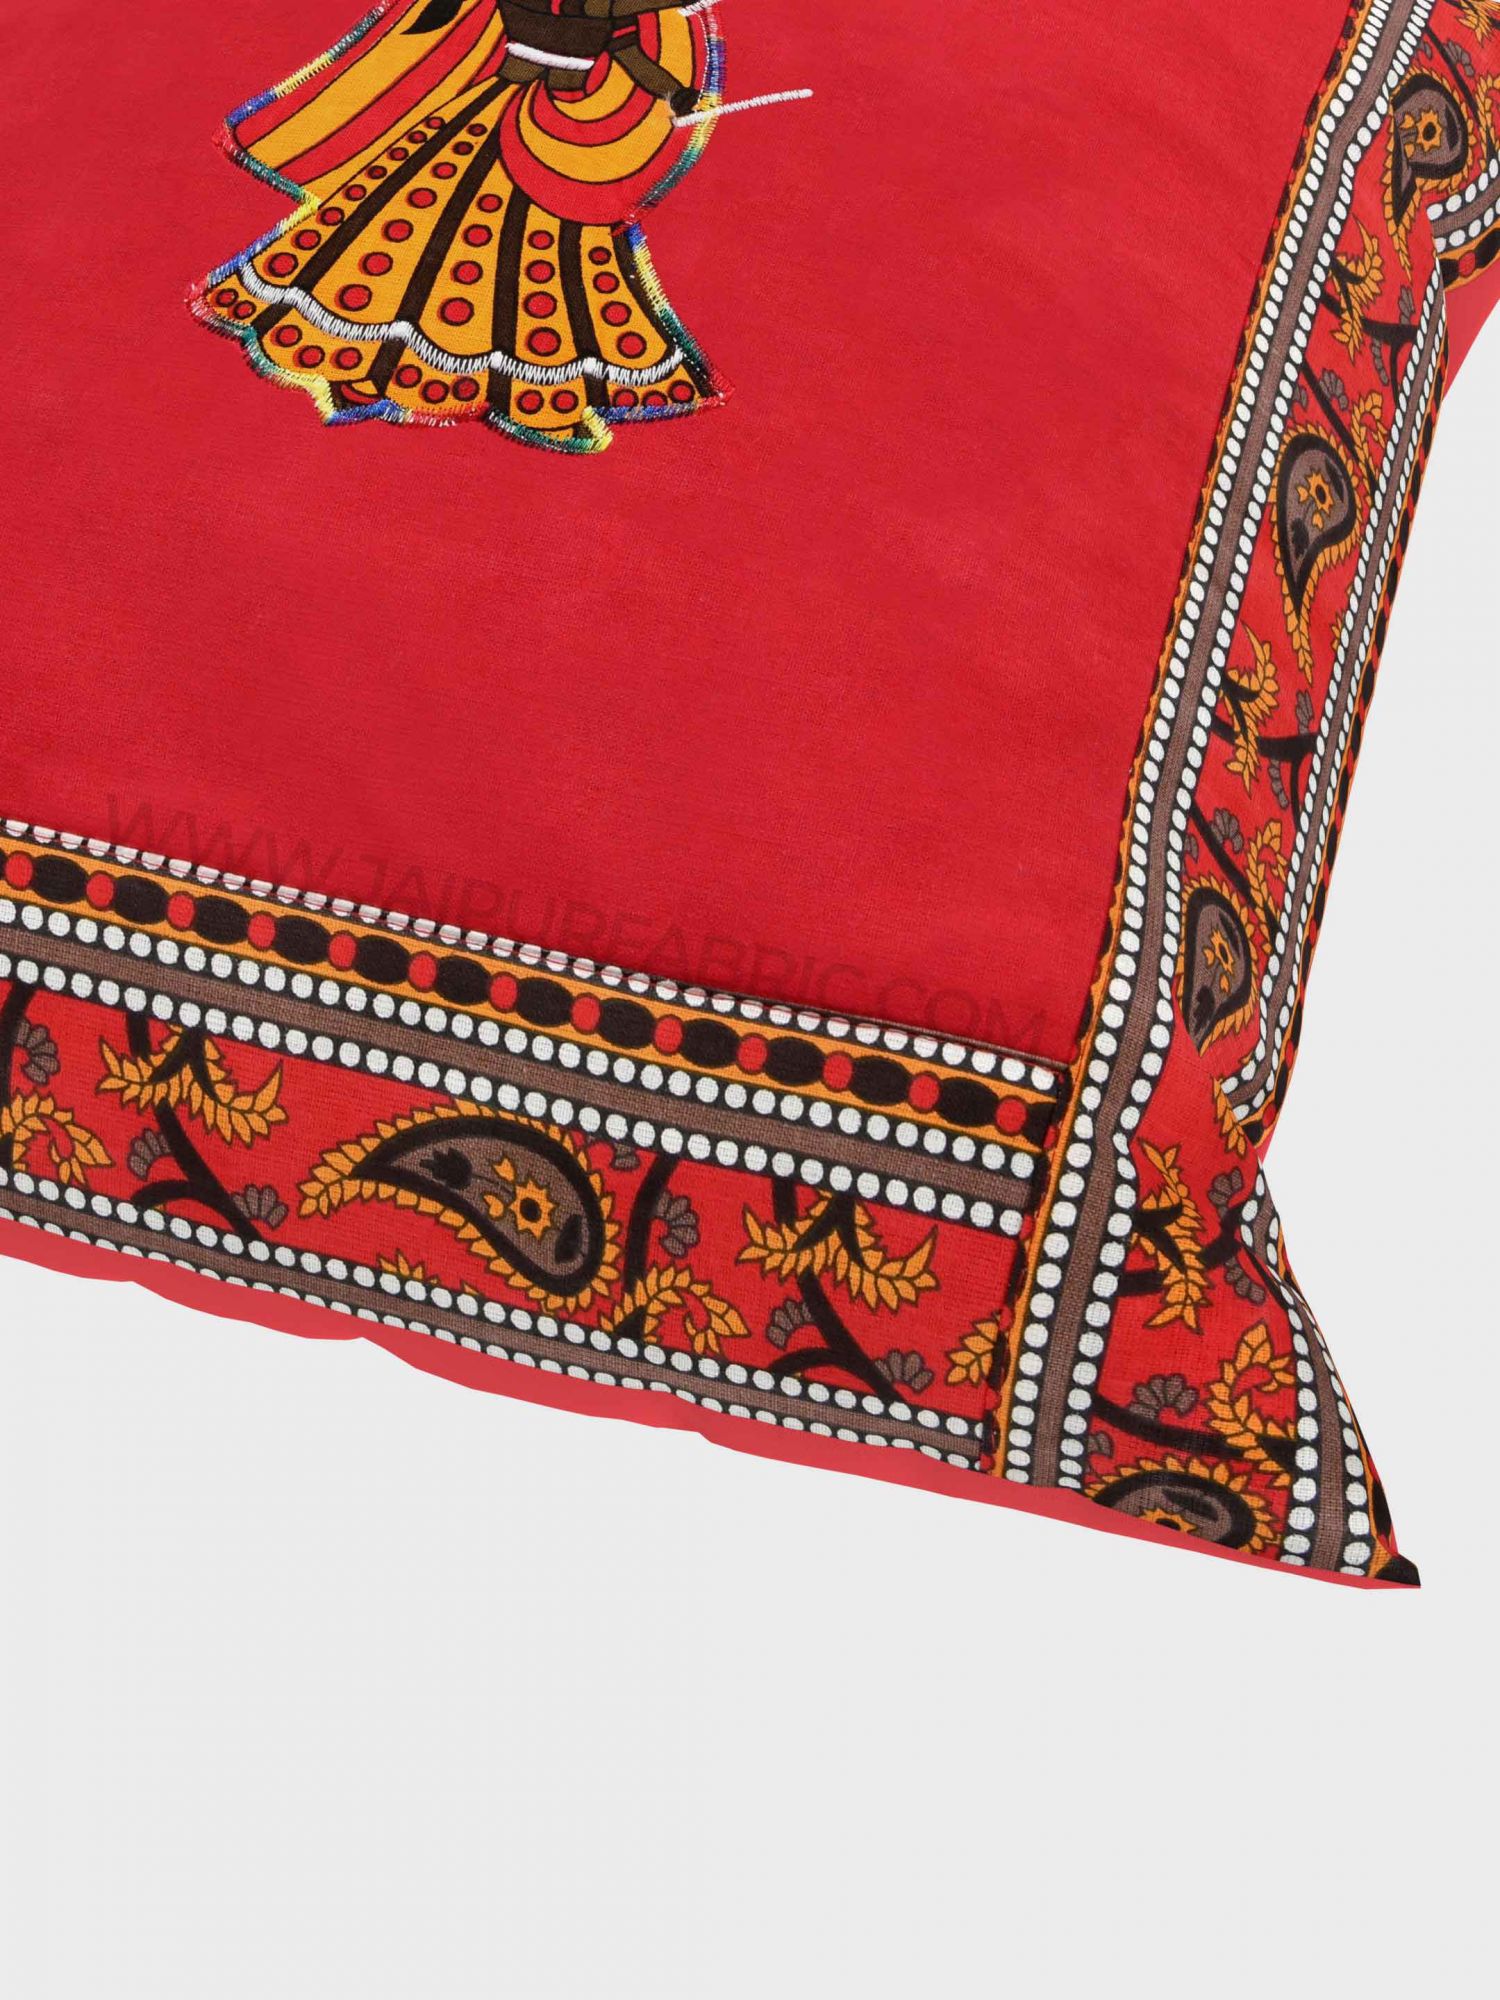 Applique Red Dandiya Jaipuri Hand Made Embroidery Patch Work Cushion Cover